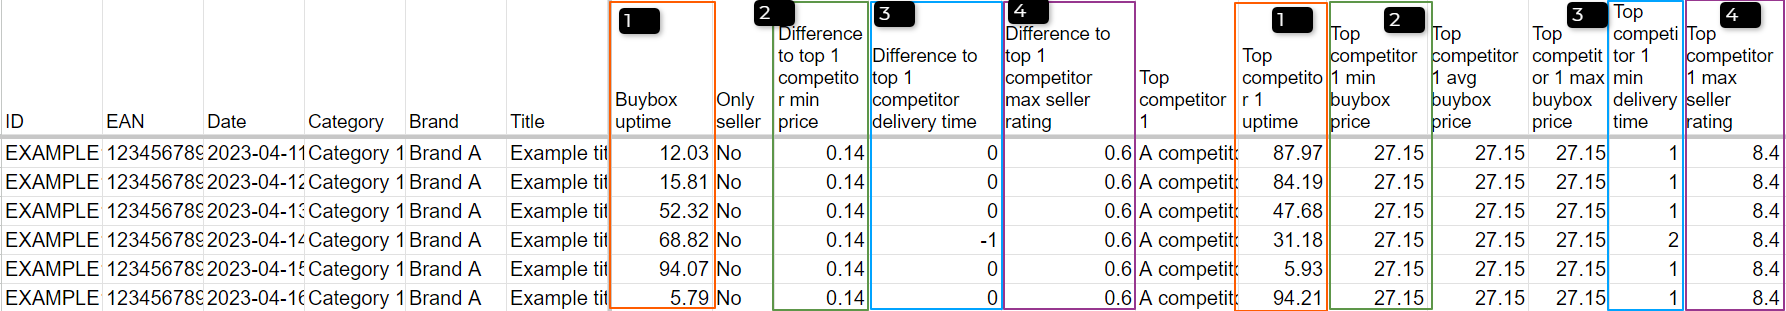 example_top_competitor_analysis_big.png